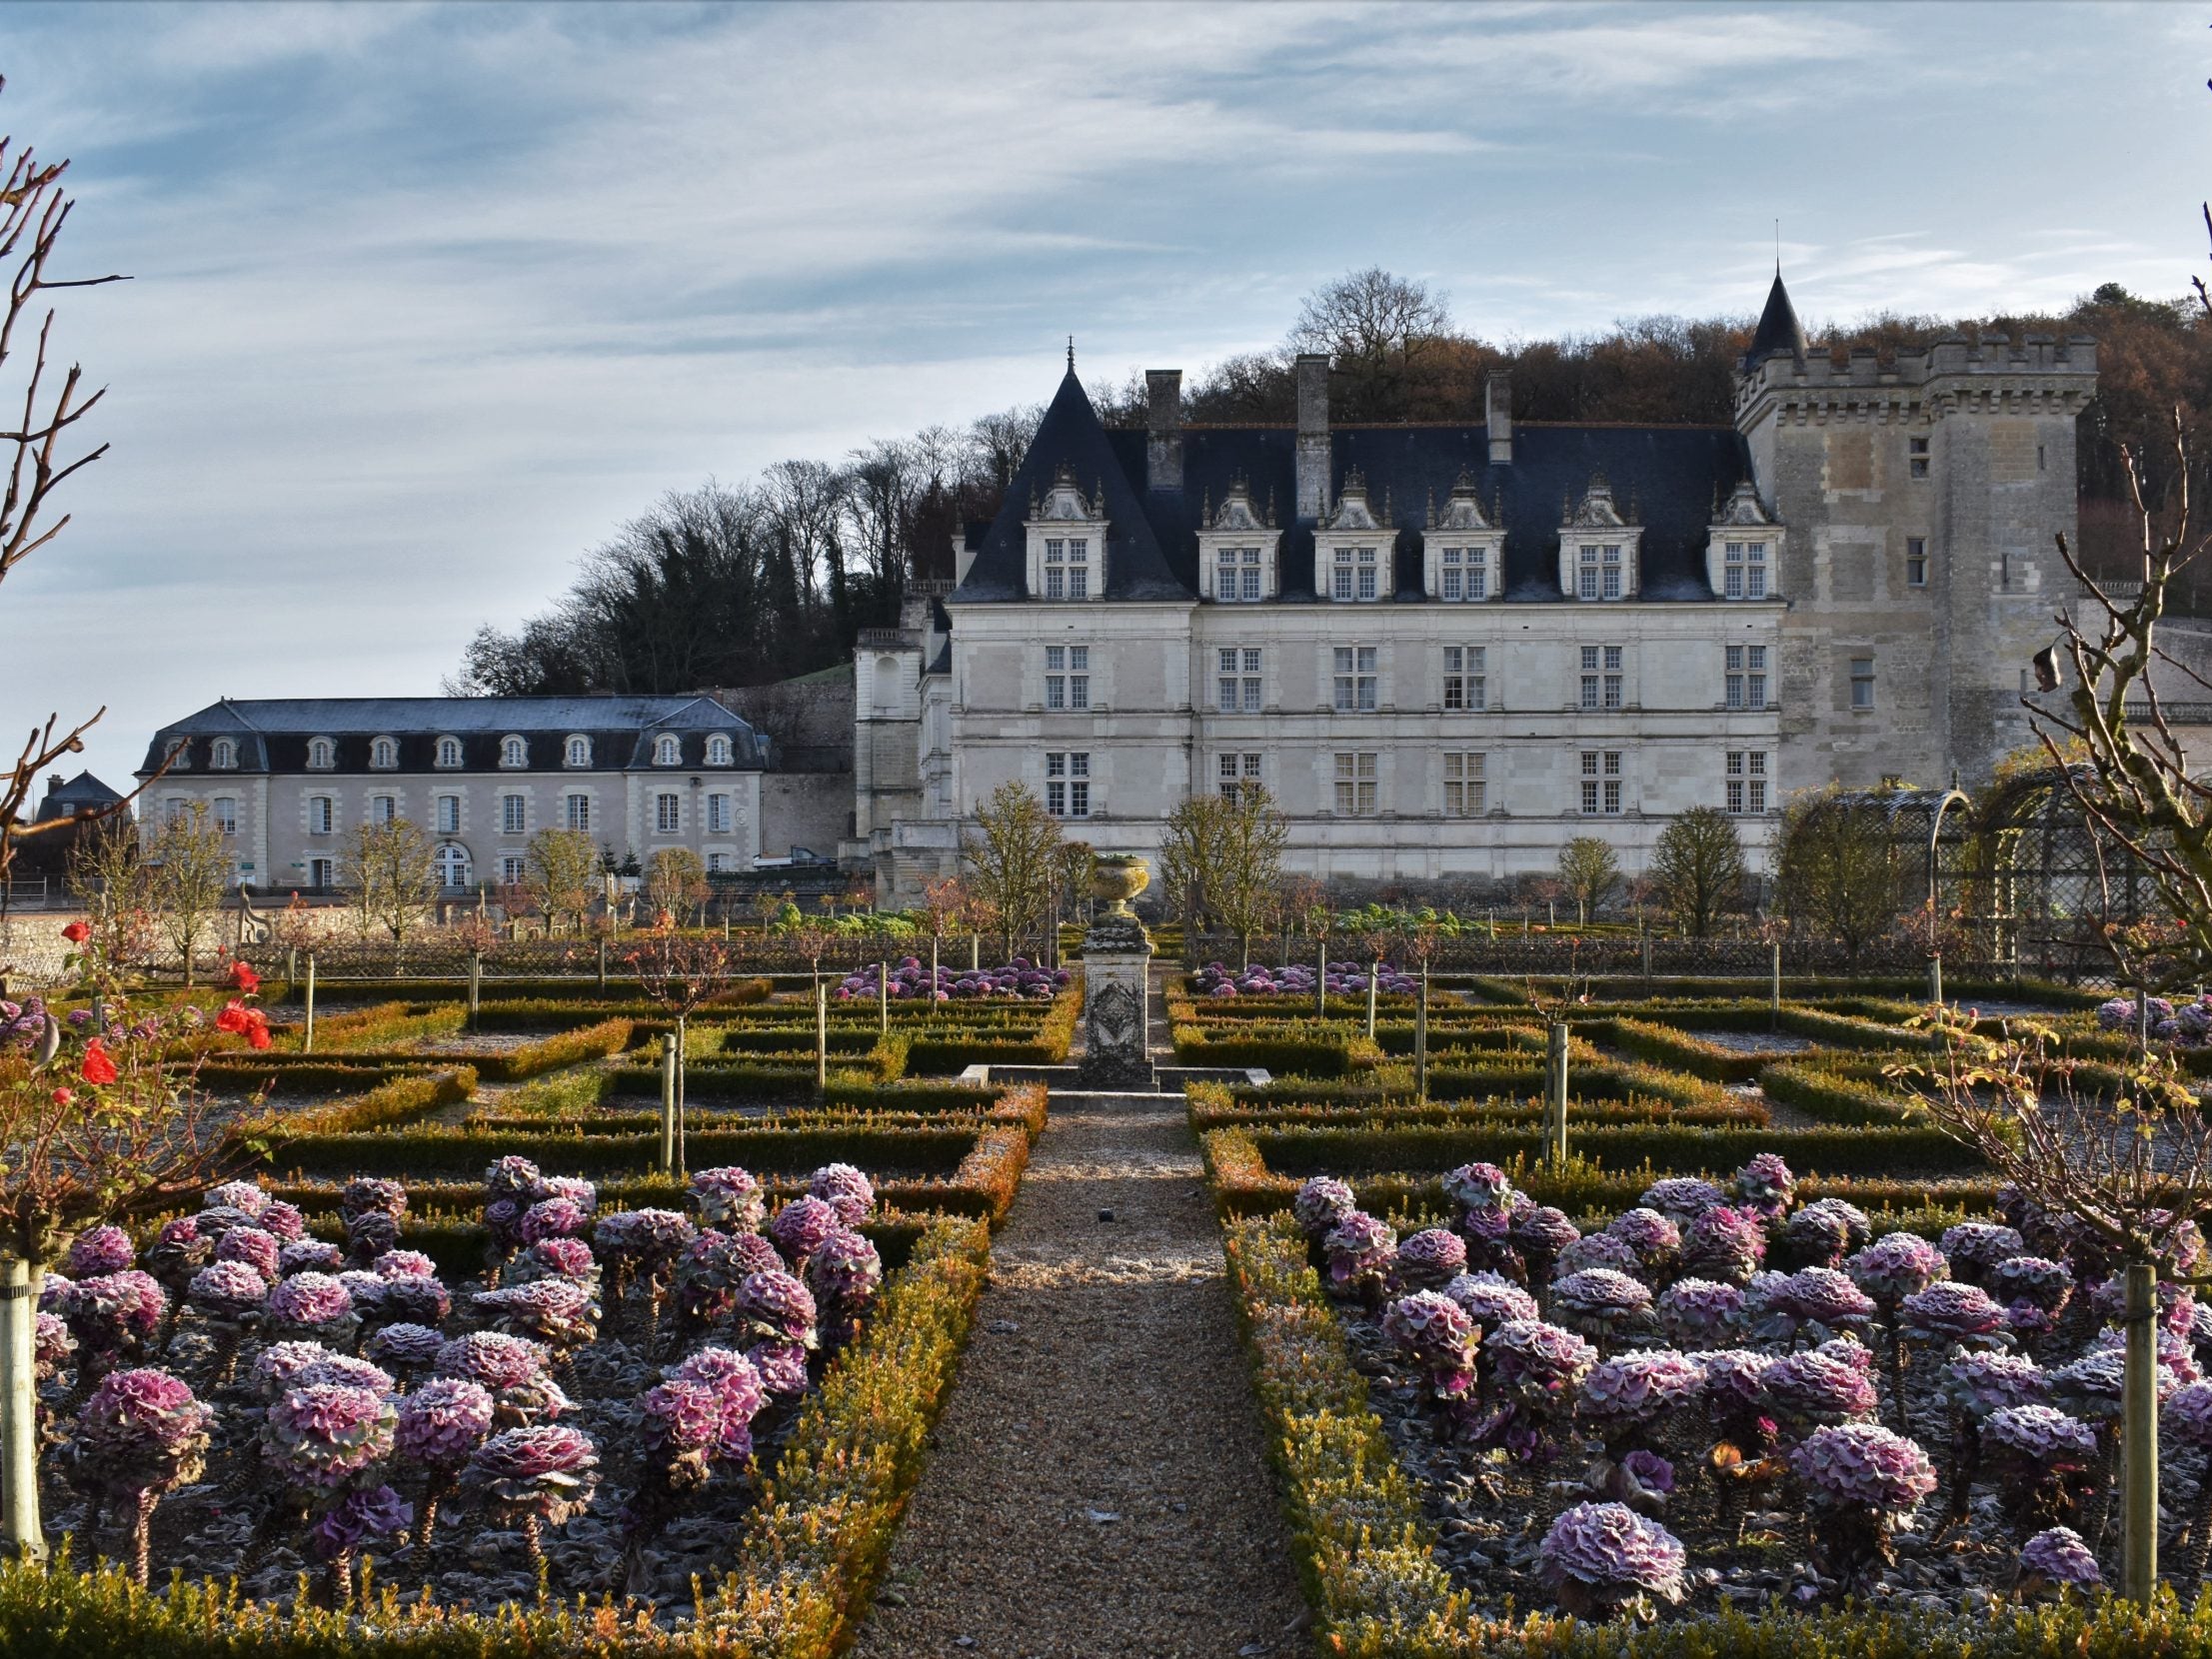 Villandry’s garden is considered one of the finest in France